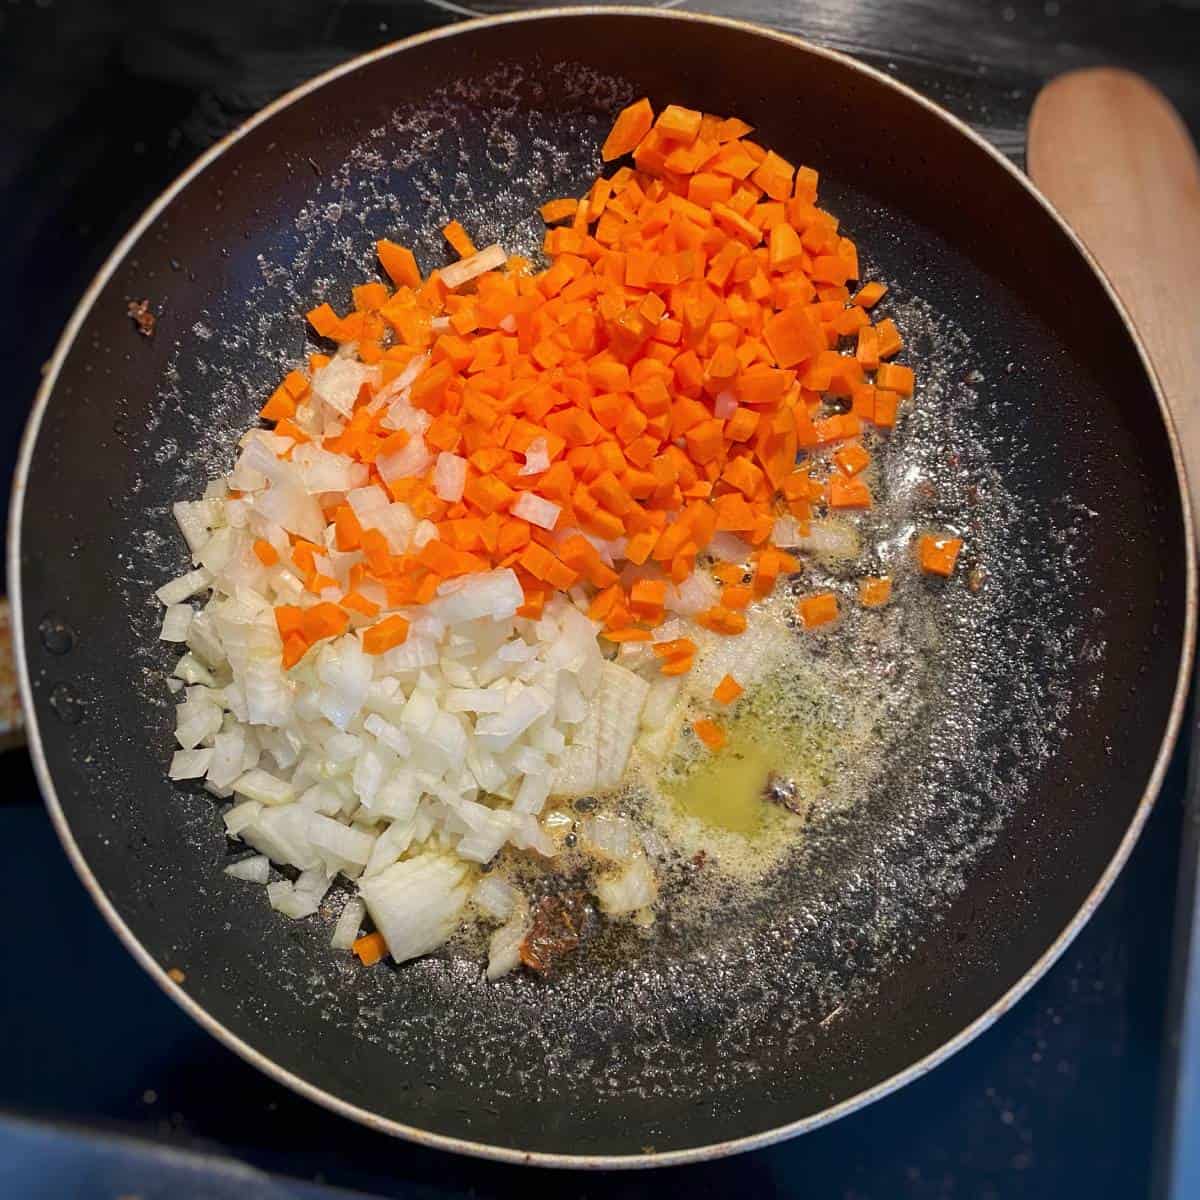 The chopped ingredients for cheesy chicken pasta frying in a fry pan